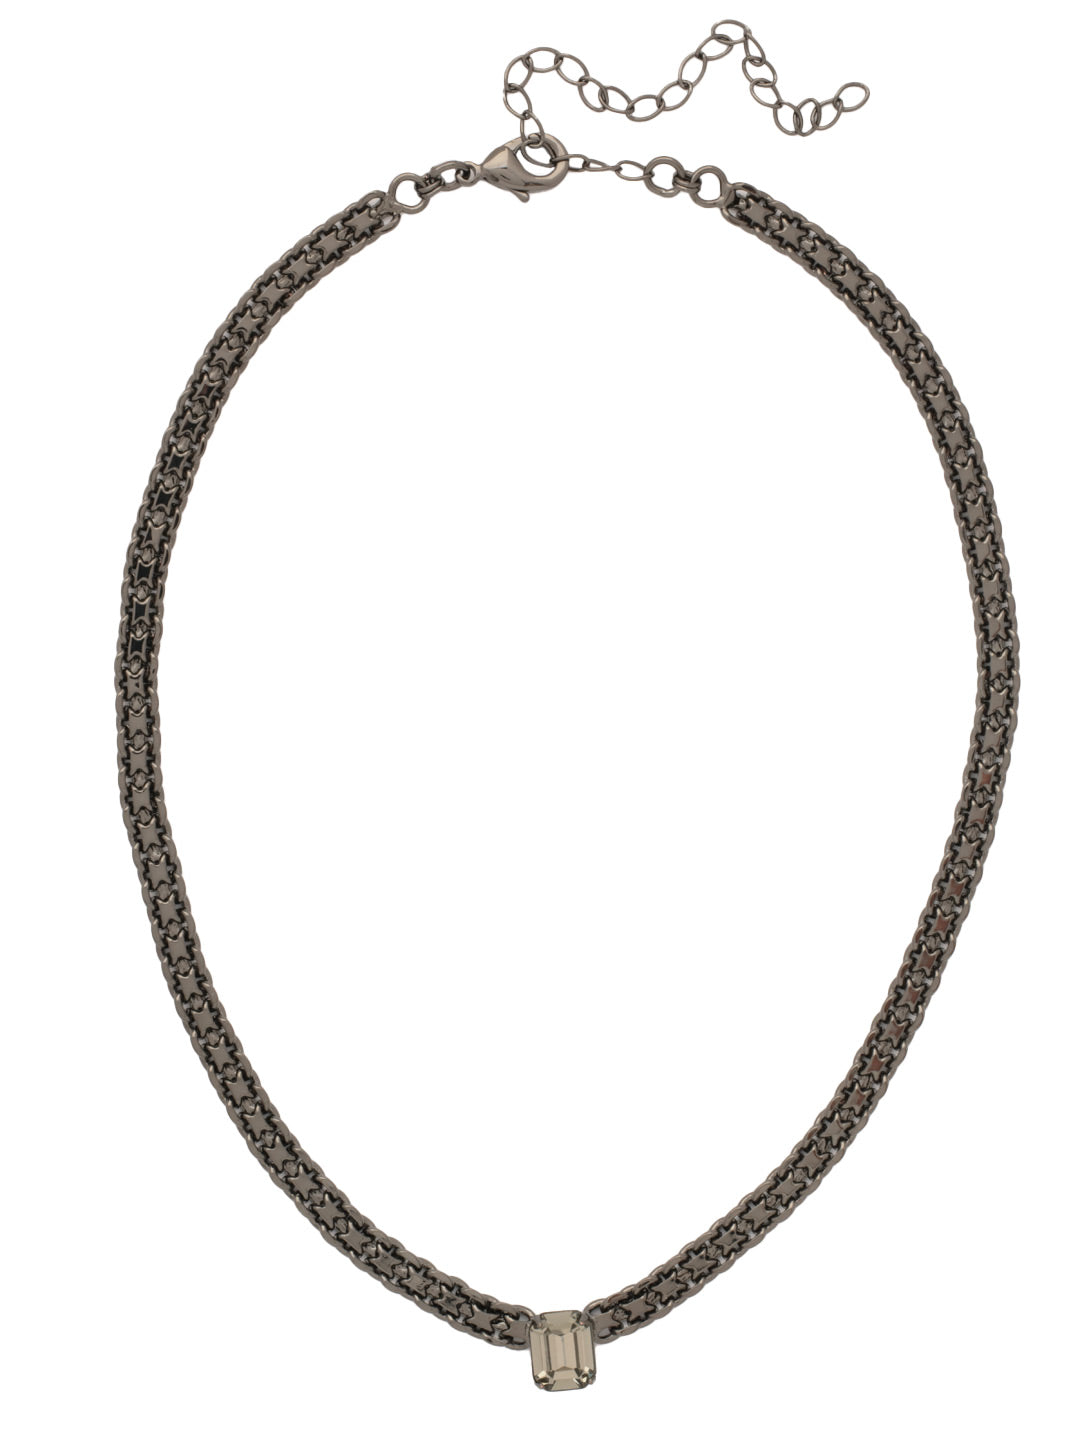 Octavia Tennis Necklace - NFK6GMBD - <p>The Octavia Tennis Necklace features a single petite emerald cut crystal on an adjustable chain, secured with a lobster claw clasp. From Sorrelli's Black Diamond collection in our Gun Metal finish.</p>